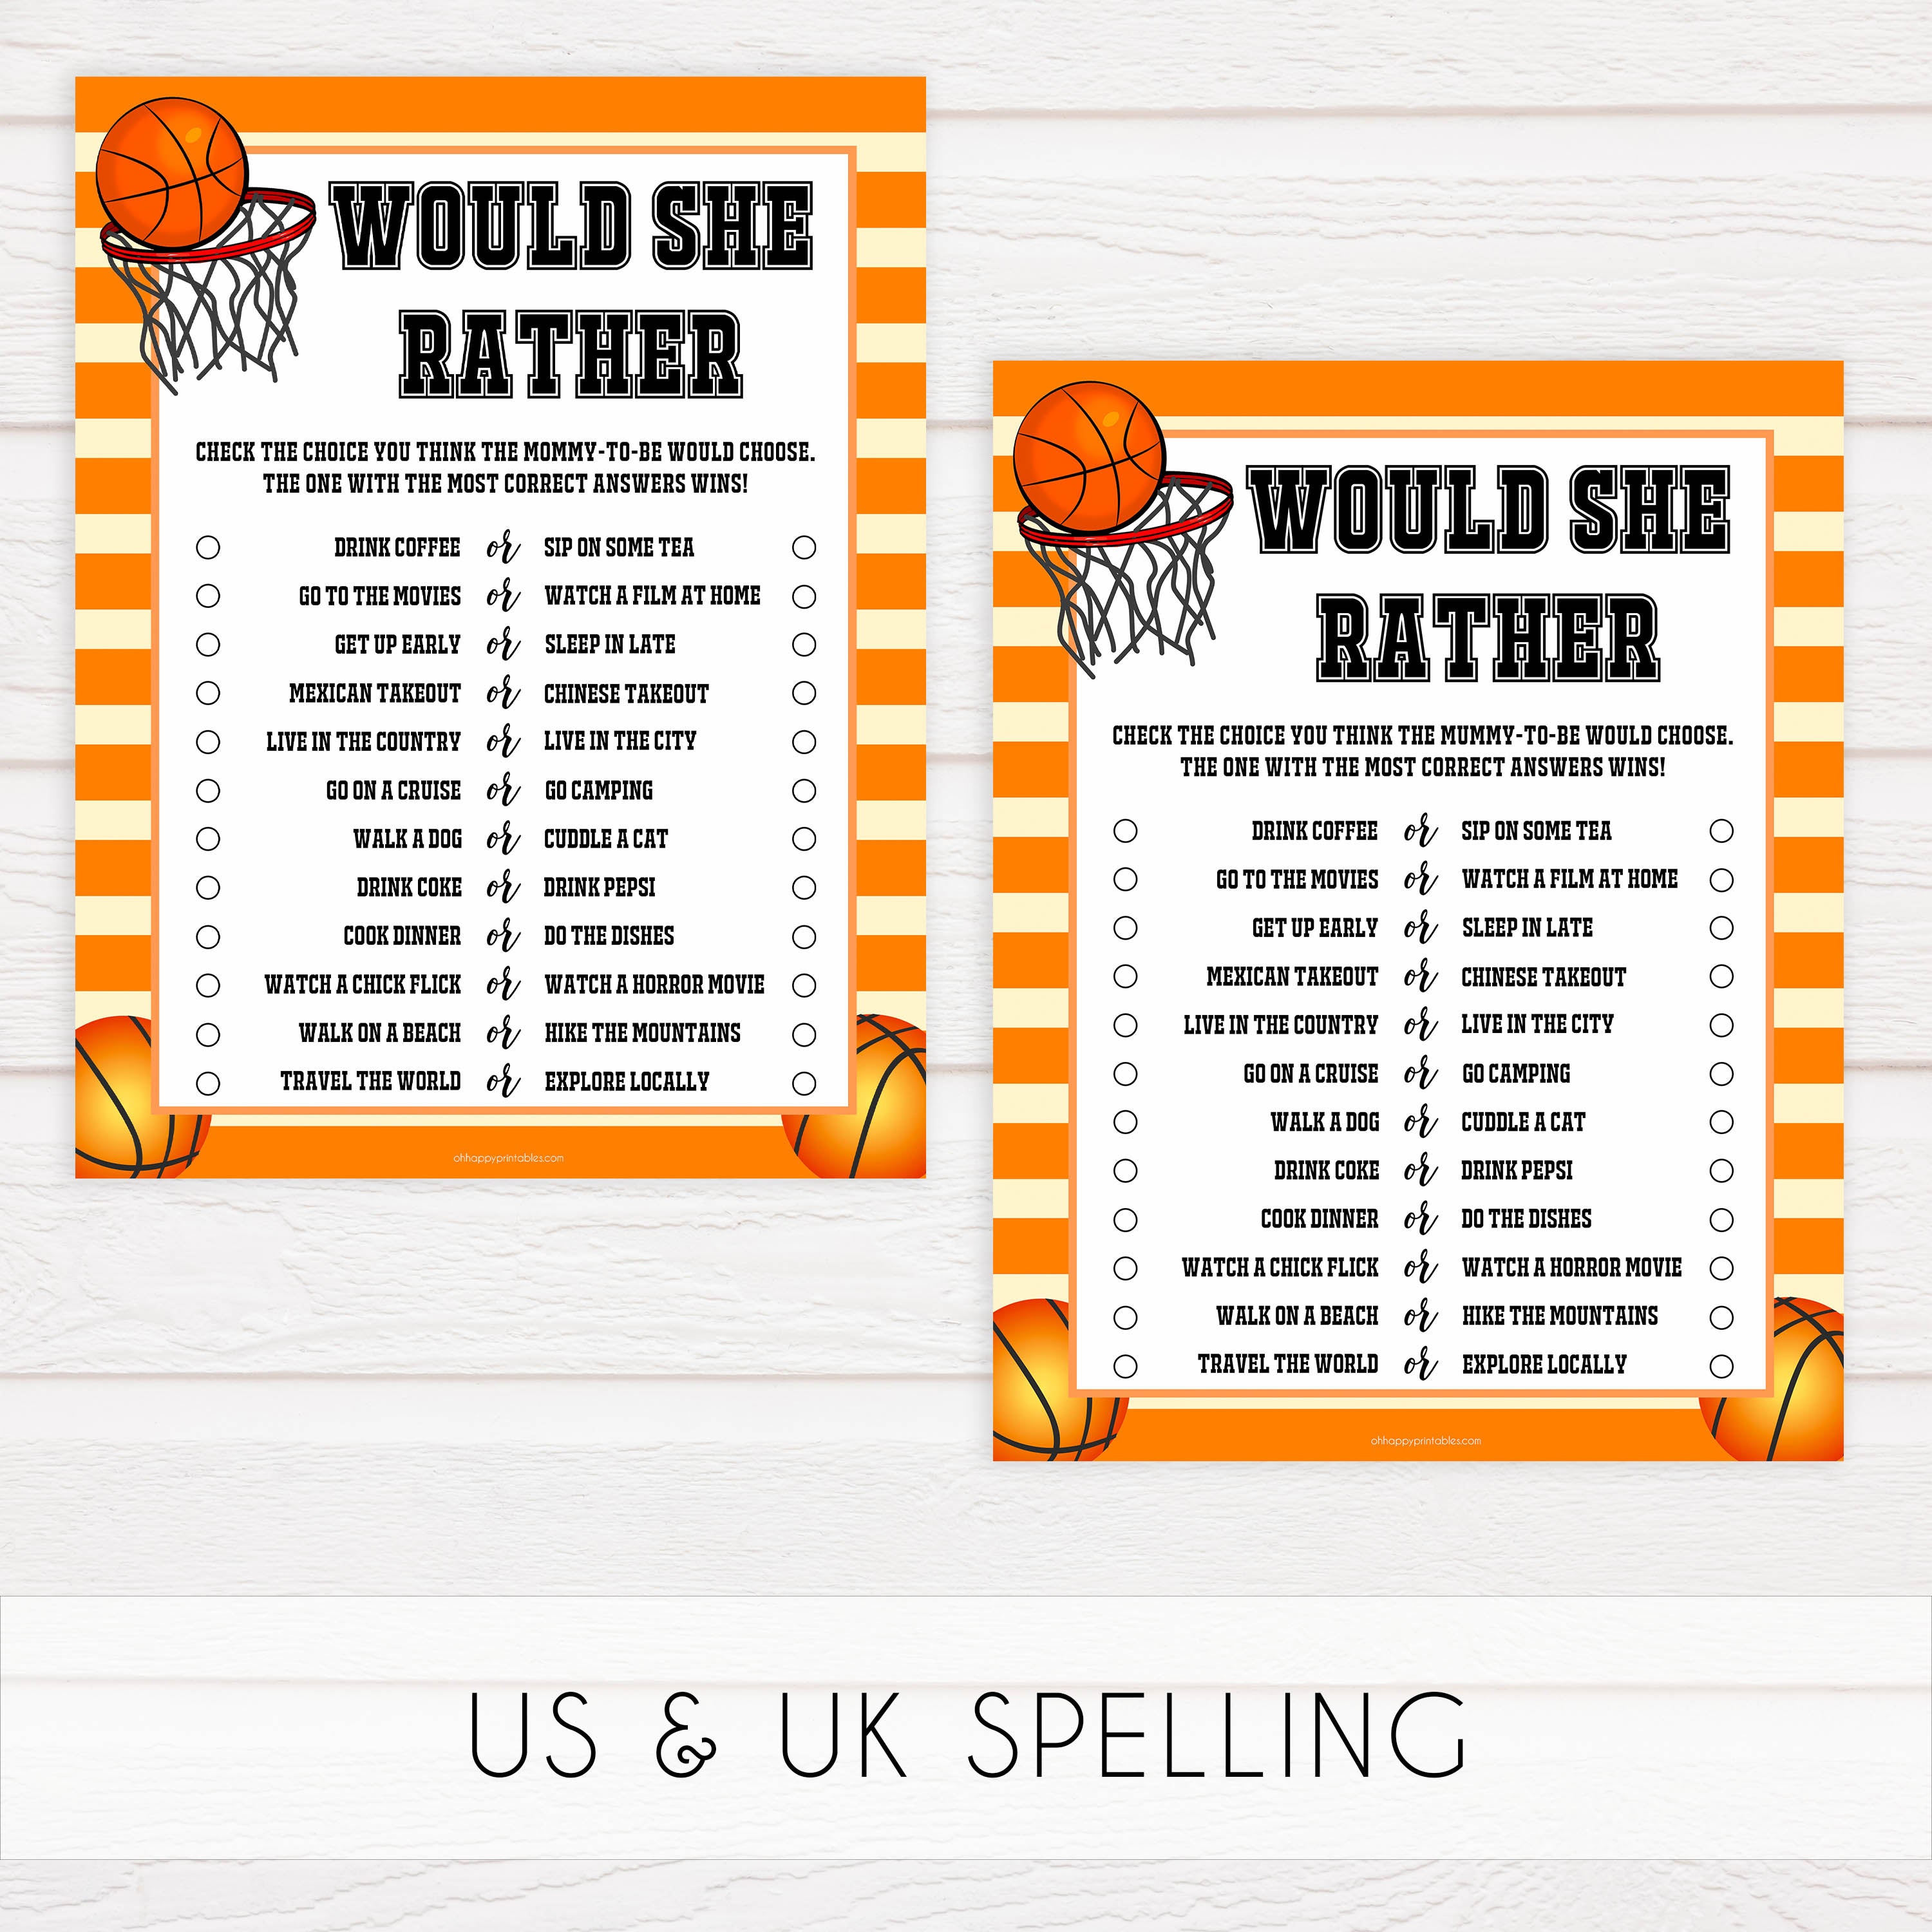 baby would she rather, would she rather game, Printable baby shower games, basketball fun baby games, baby shower games, fun baby shower ideas, top baby shower ideas, basketball baby shower, basketball baby shower ideas